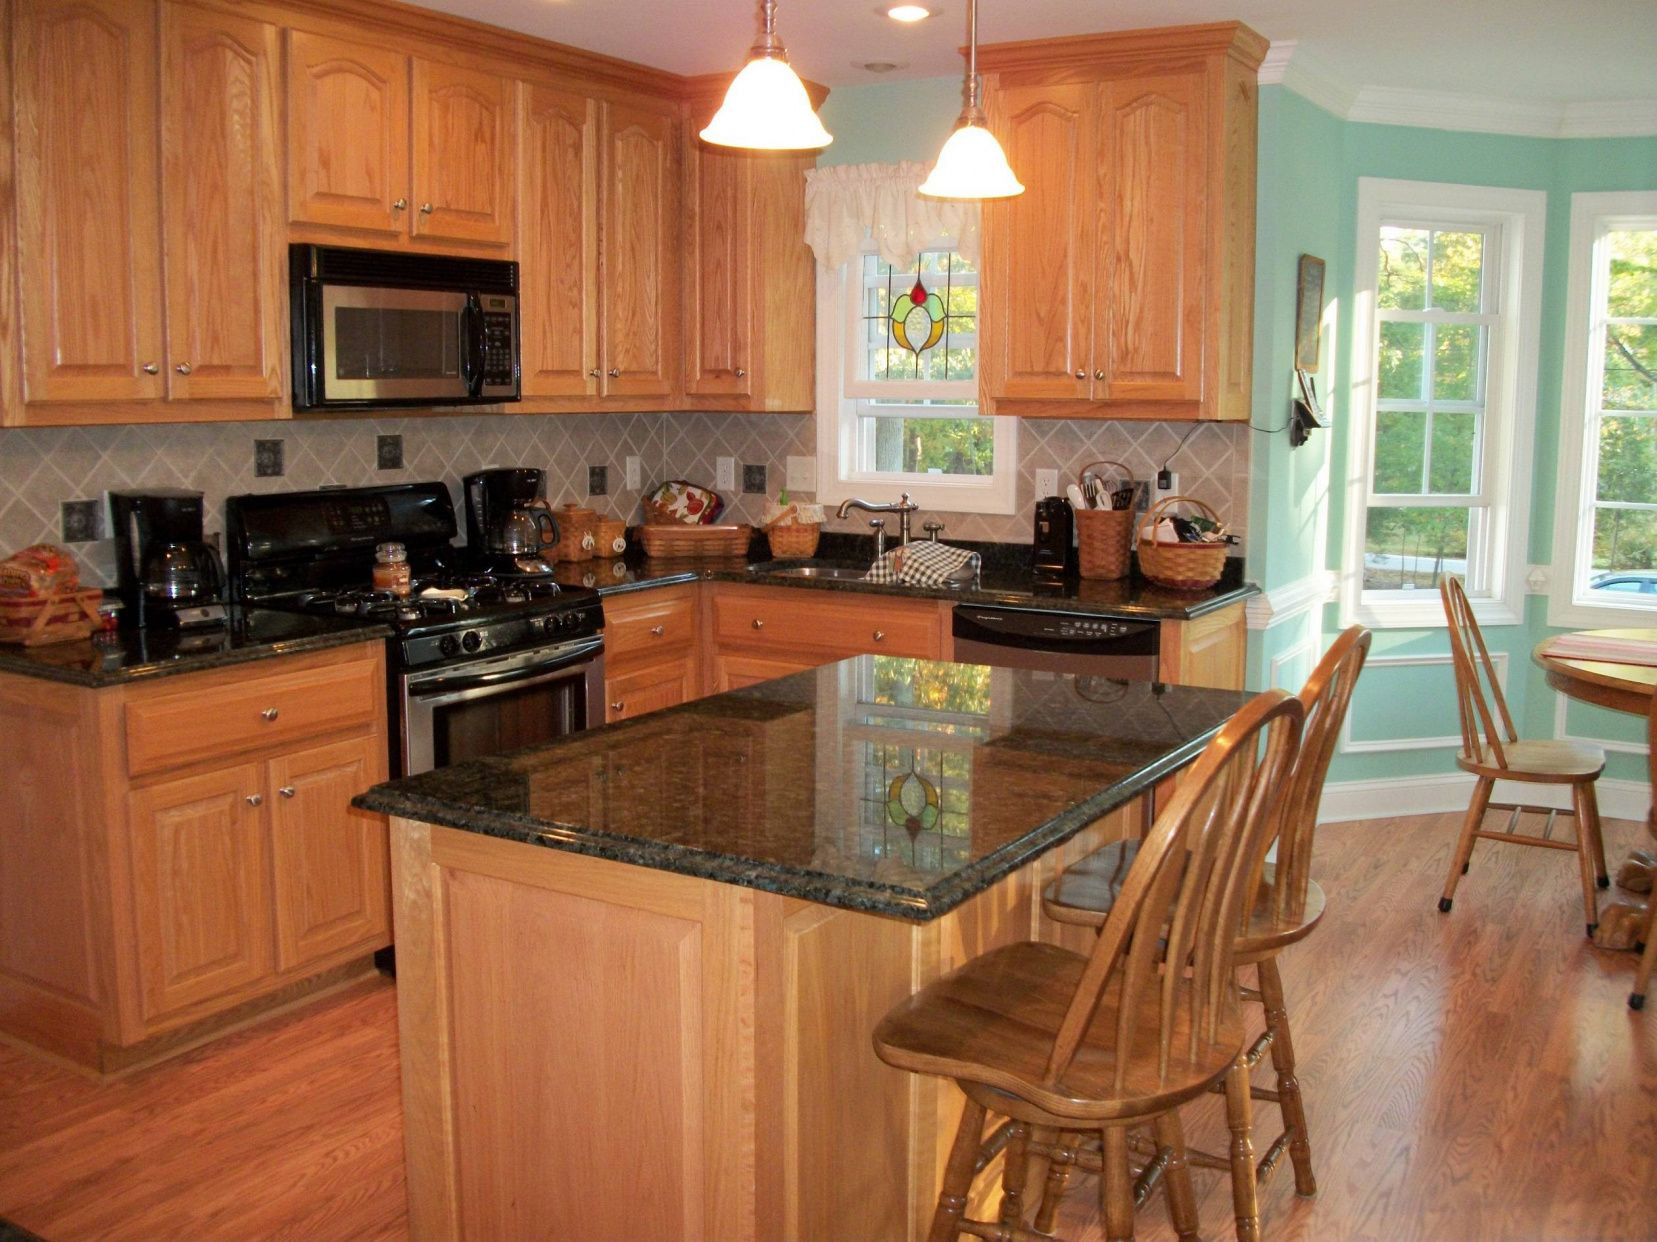 Cost Of New Kitchen Countertops
 77 What is the Average Cost Granite Countertops